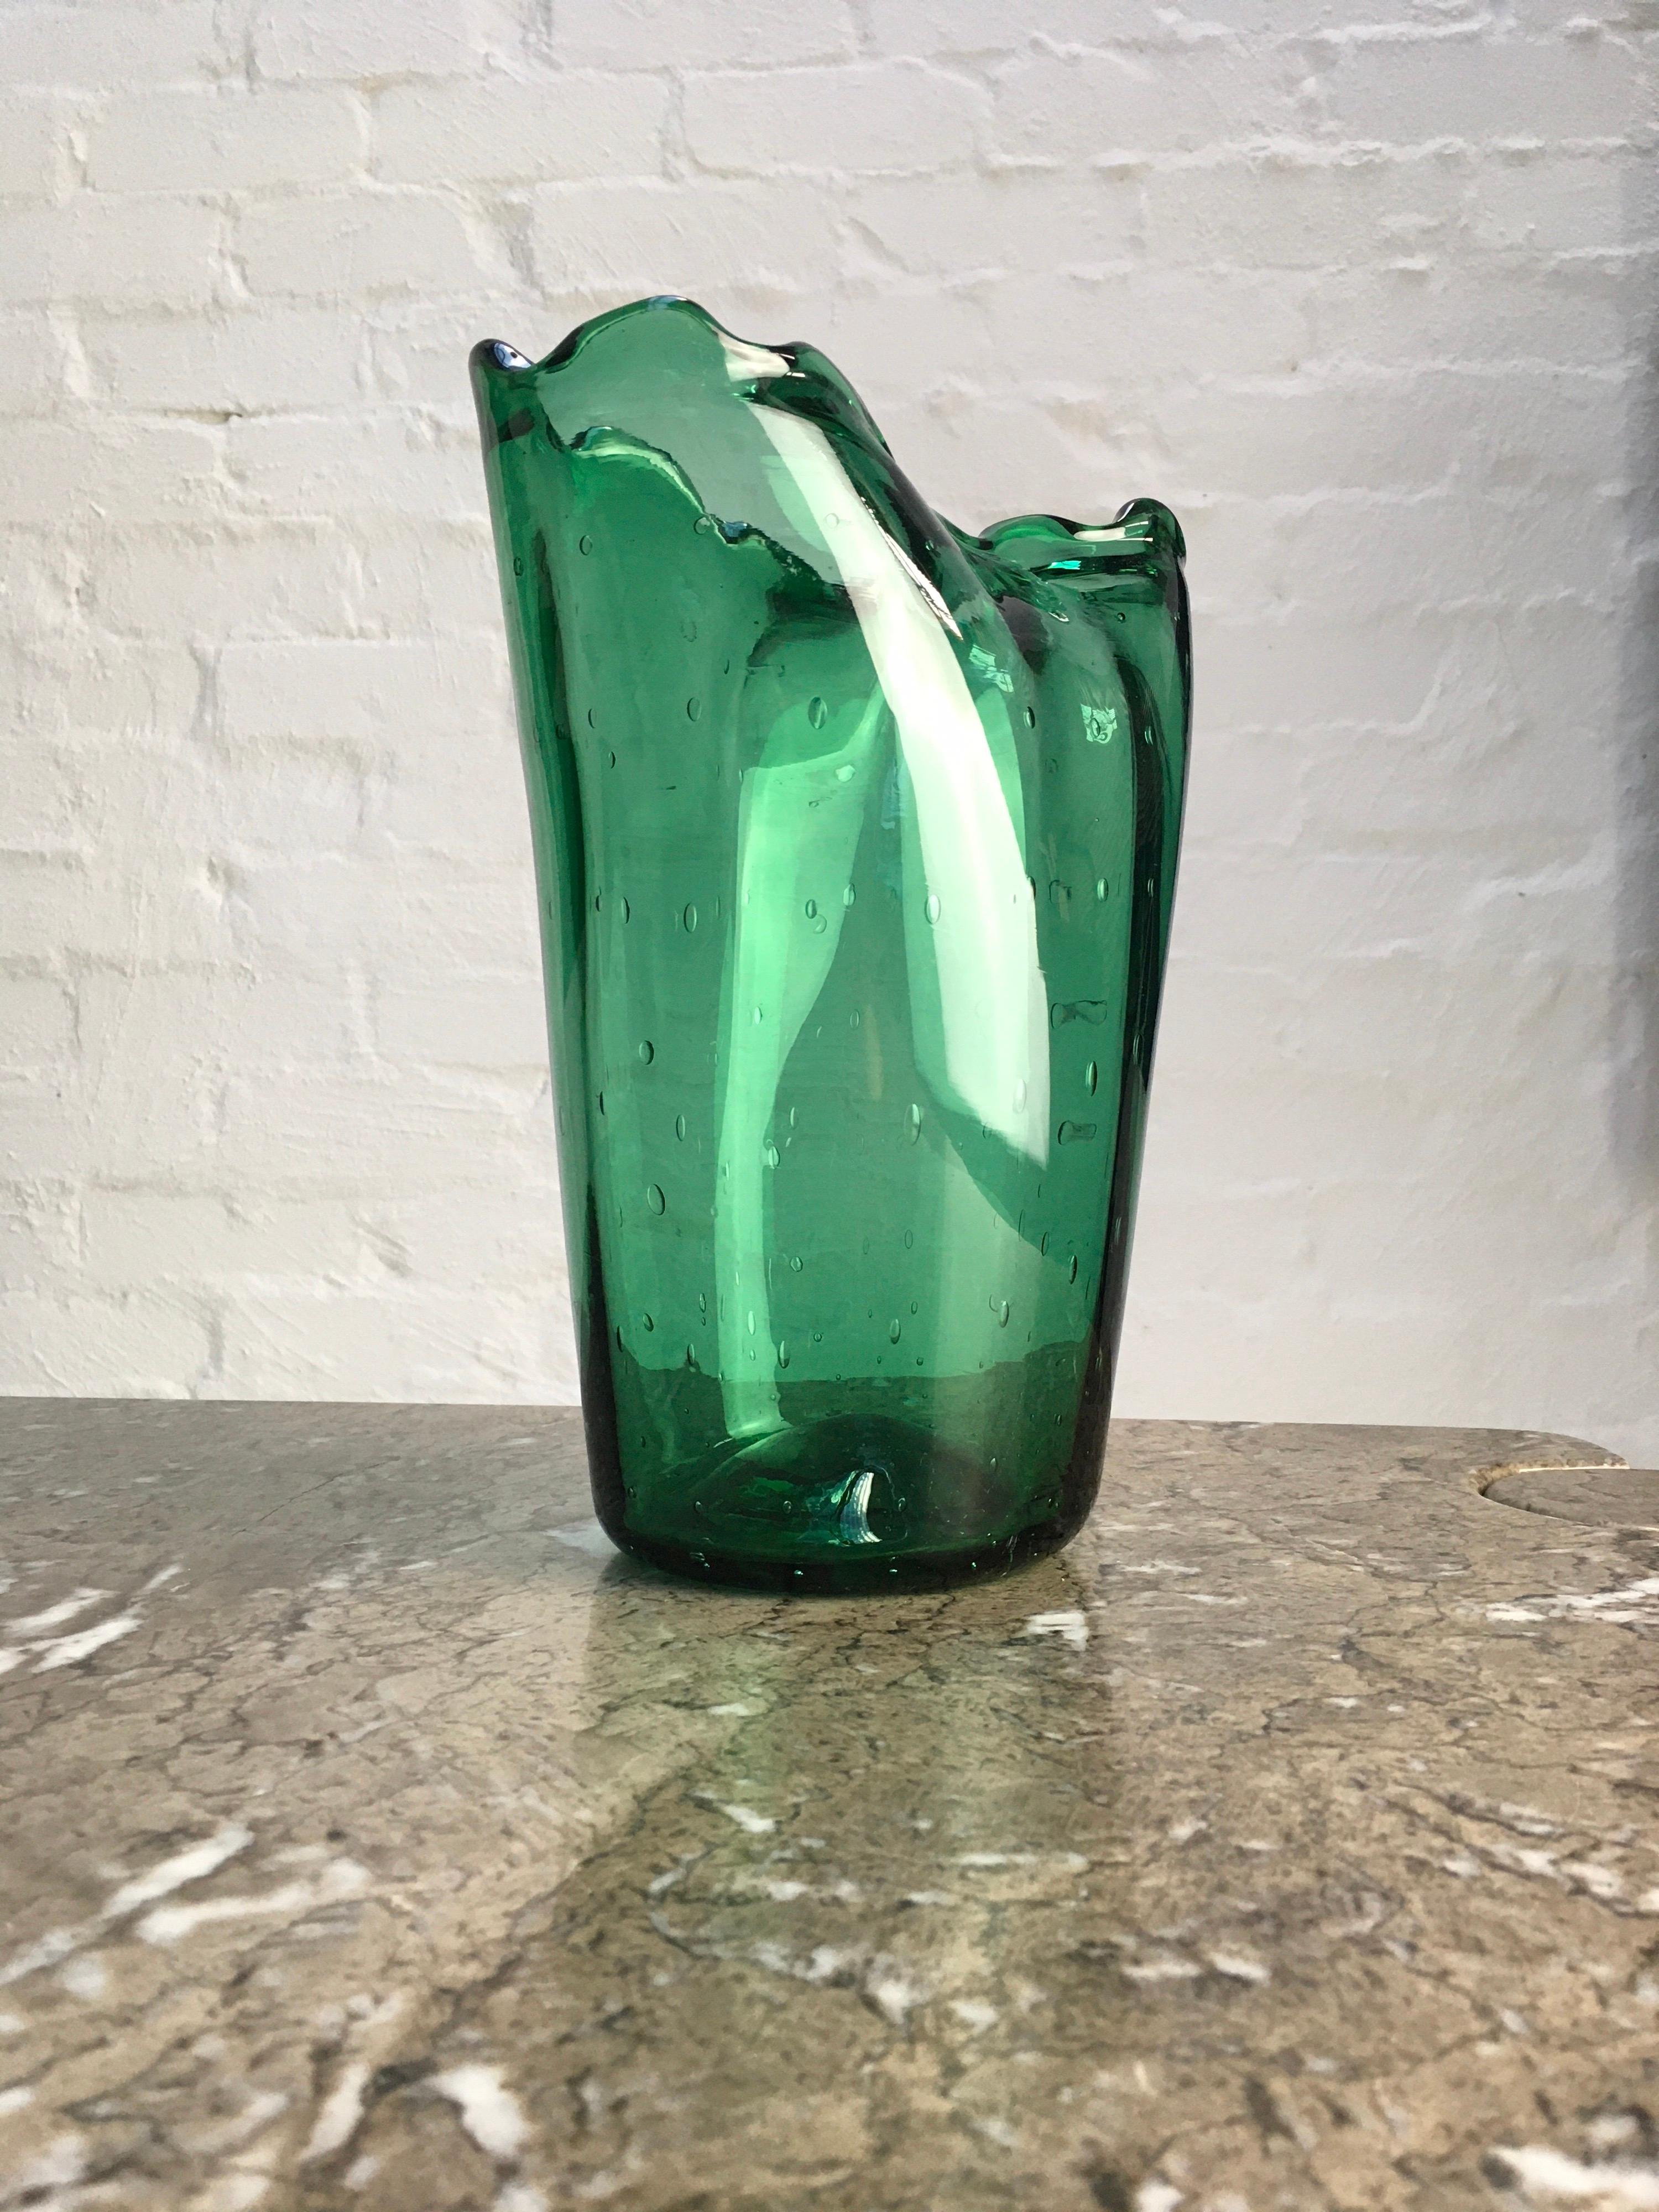 A large vase in a beautiful Bottle Green colour. Wide-set controlled bubbles, a rounded edge to the foot, a ground pontil and undulating lip all indicate the style (if not the work) of Seguso. A very handsome vase. 

Good condition to the visible